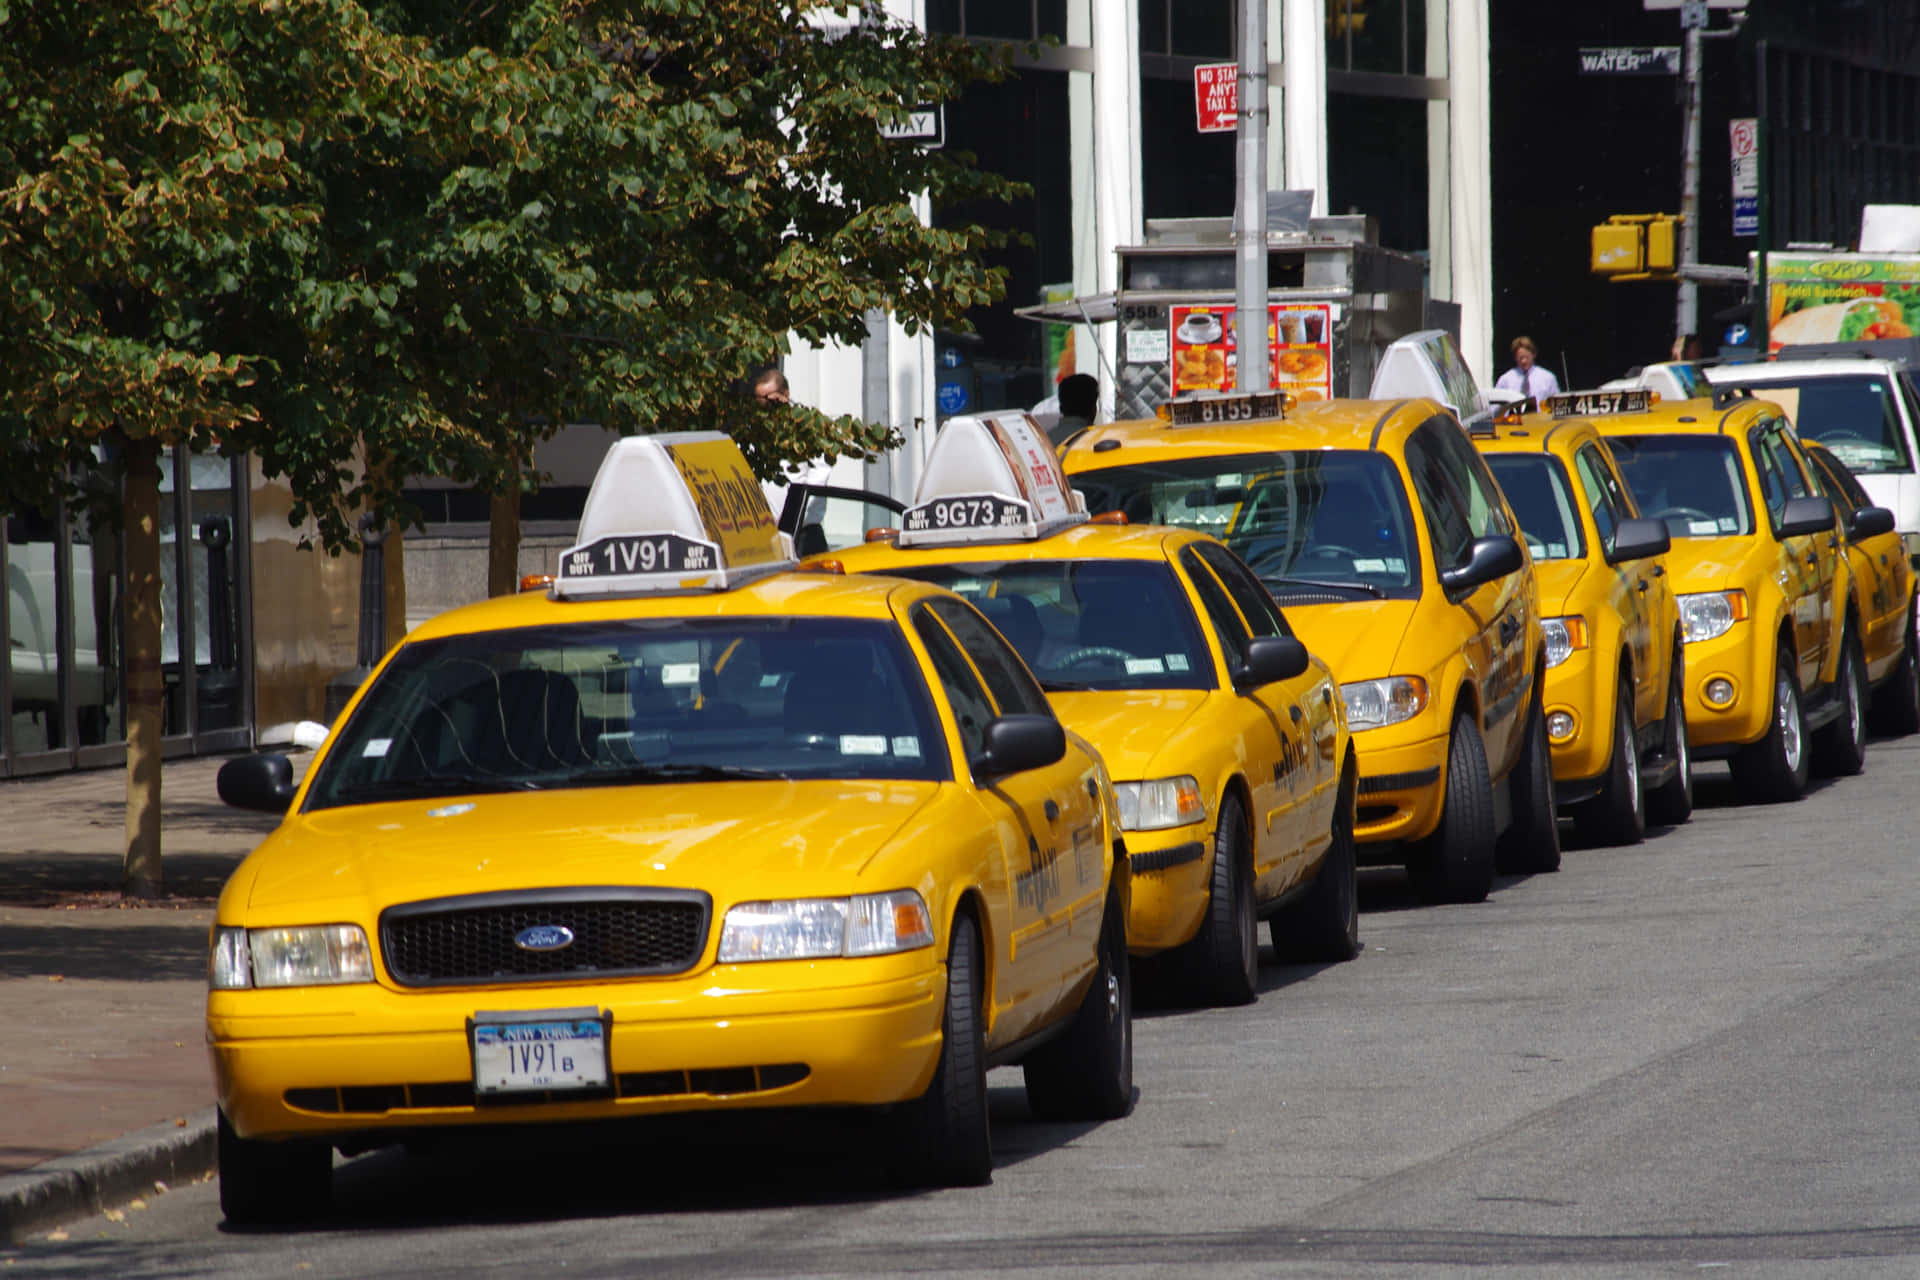 Iconic Yellow Cab in a Vibrant City Wallpaper